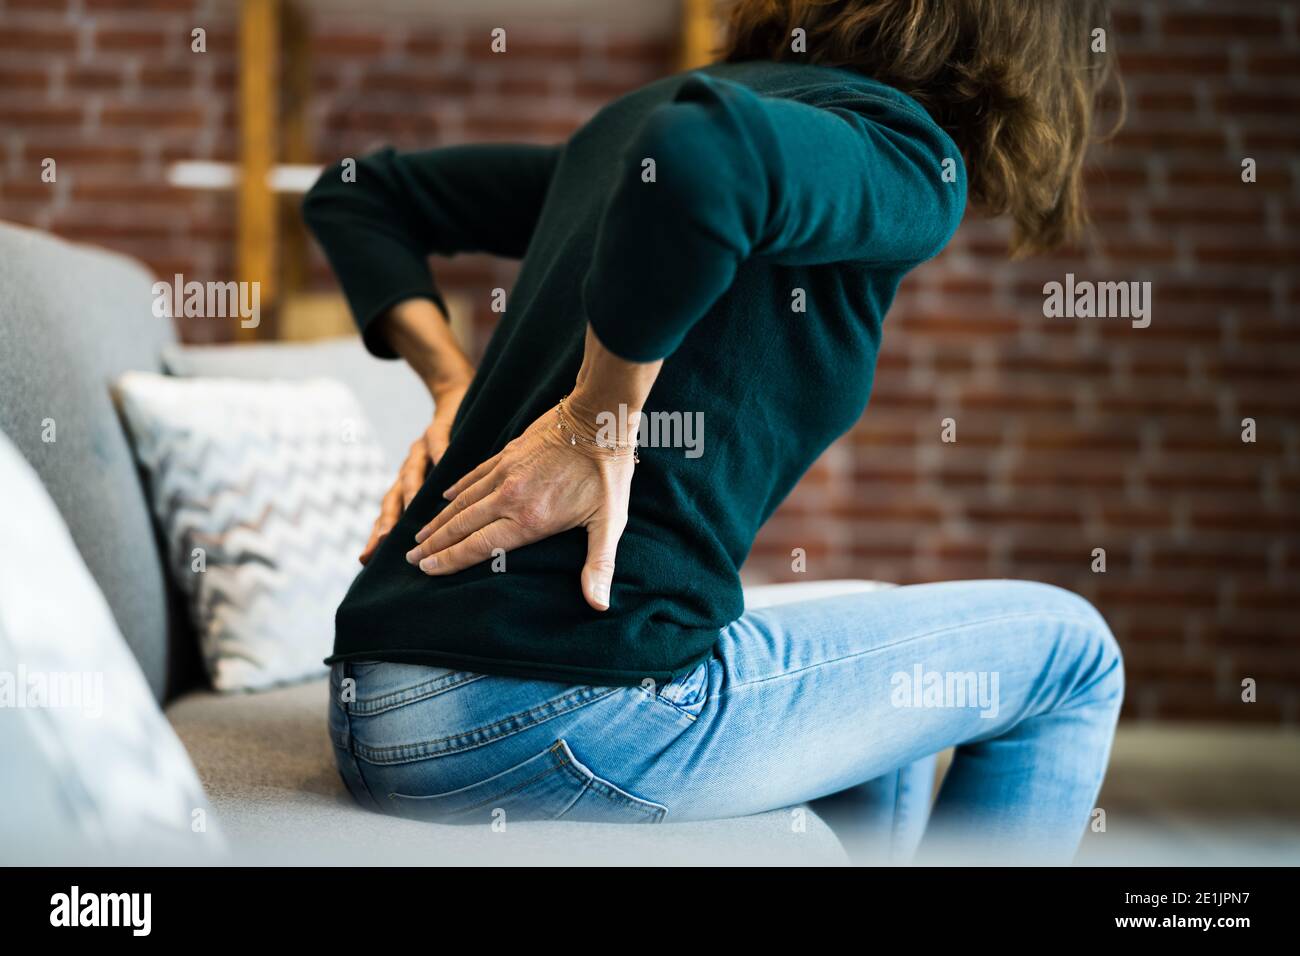 Woman With Back Pain And Ache. Bad Posture Stock Photo